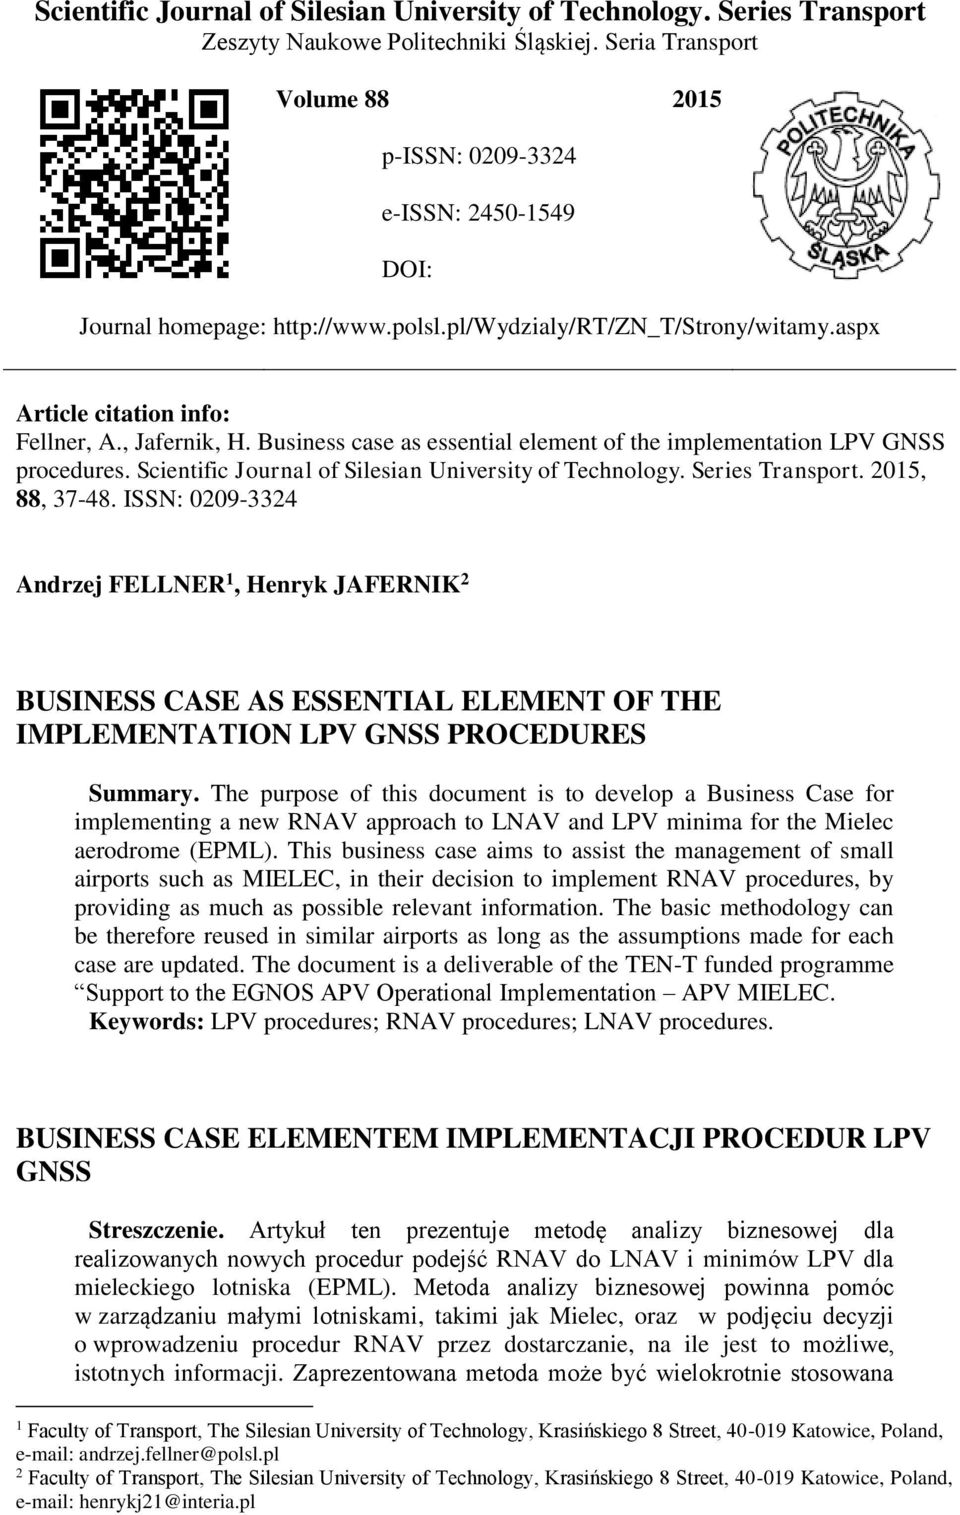 Business case as essential element of the implementation LPV GNSS procedures. Scientific Journal of Silesian University of Technology. Series Transport. 2015, 88, 37-48.